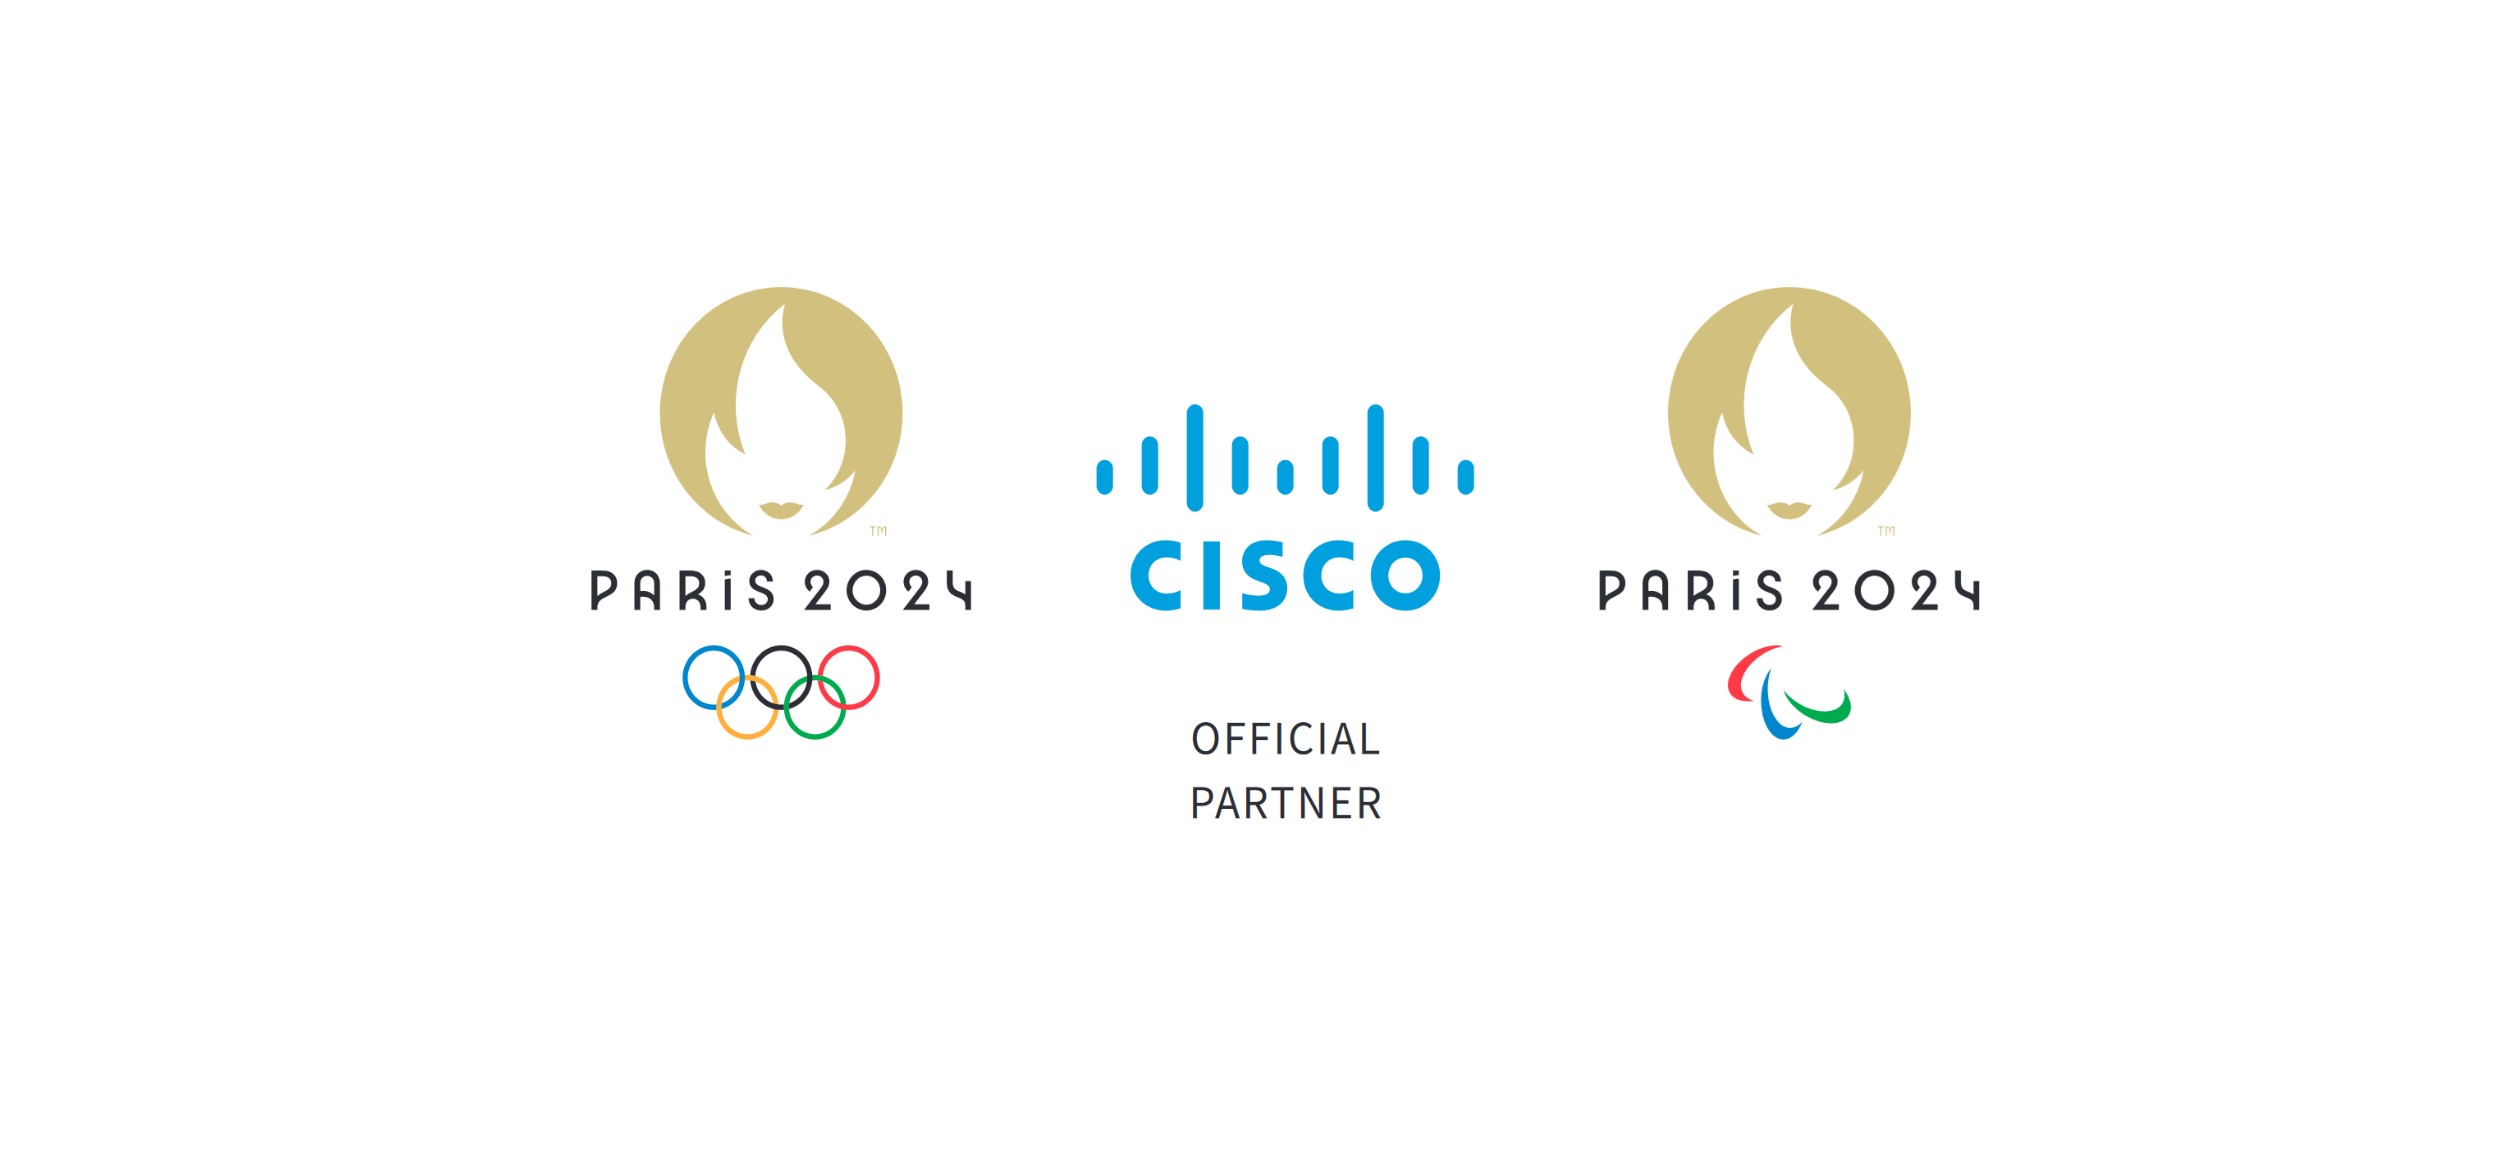 Cisco Becomes Official Partner For Paris 2024 International Paralympic Committee